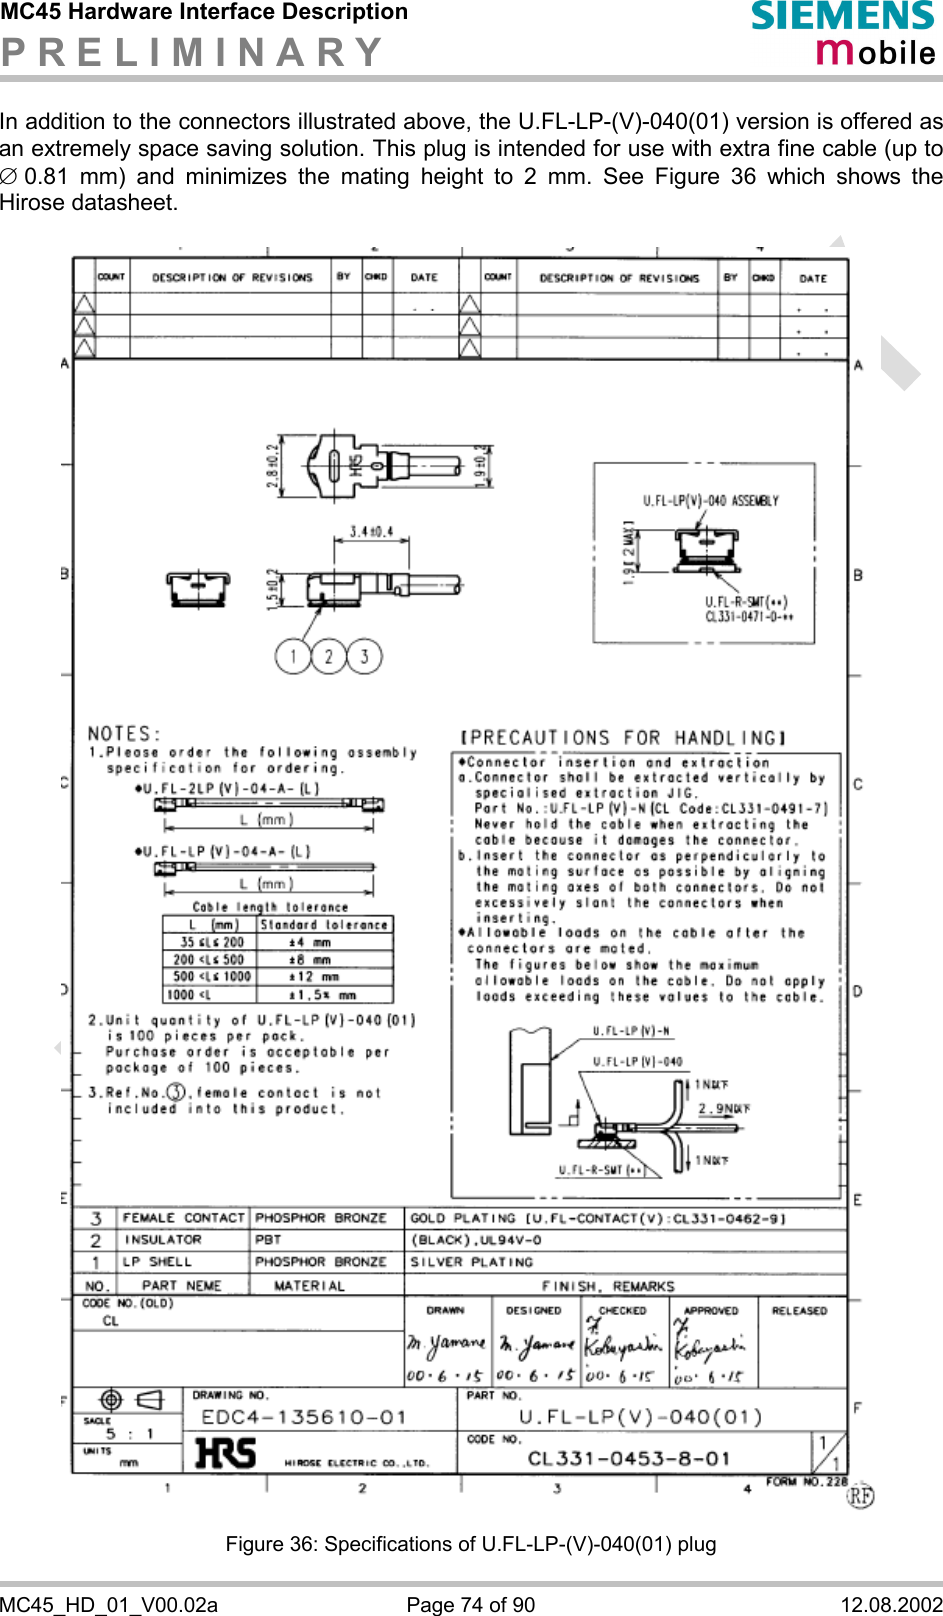 MC45 Hardware Interface Description P R E L I M I N A R Y      MC45_HD_01_V00.02a  Page 74 of 90  12.08.2002 In addition to the connectors illustrated above, the U.FL-LP-(V)-040(01) version is offered as an extremely space saving solution. This plug is intended for use with extra fine cable (up to Æ 0.81 mm) and minimizes the mating height to 2 mm. See Figure 36 which shows the Hirose datasheet.    Figure 36: Specifications of U.FL-LP-(V)-040(01) plug 